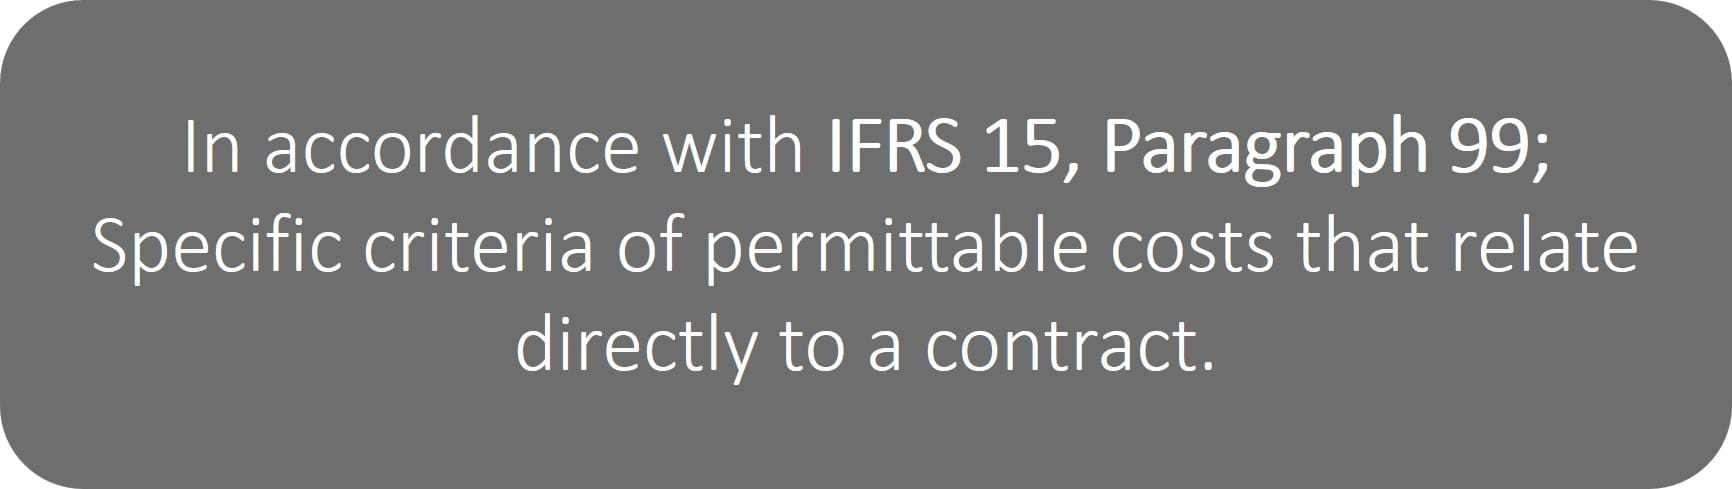 ifrs-15-paragraph-99.jpg